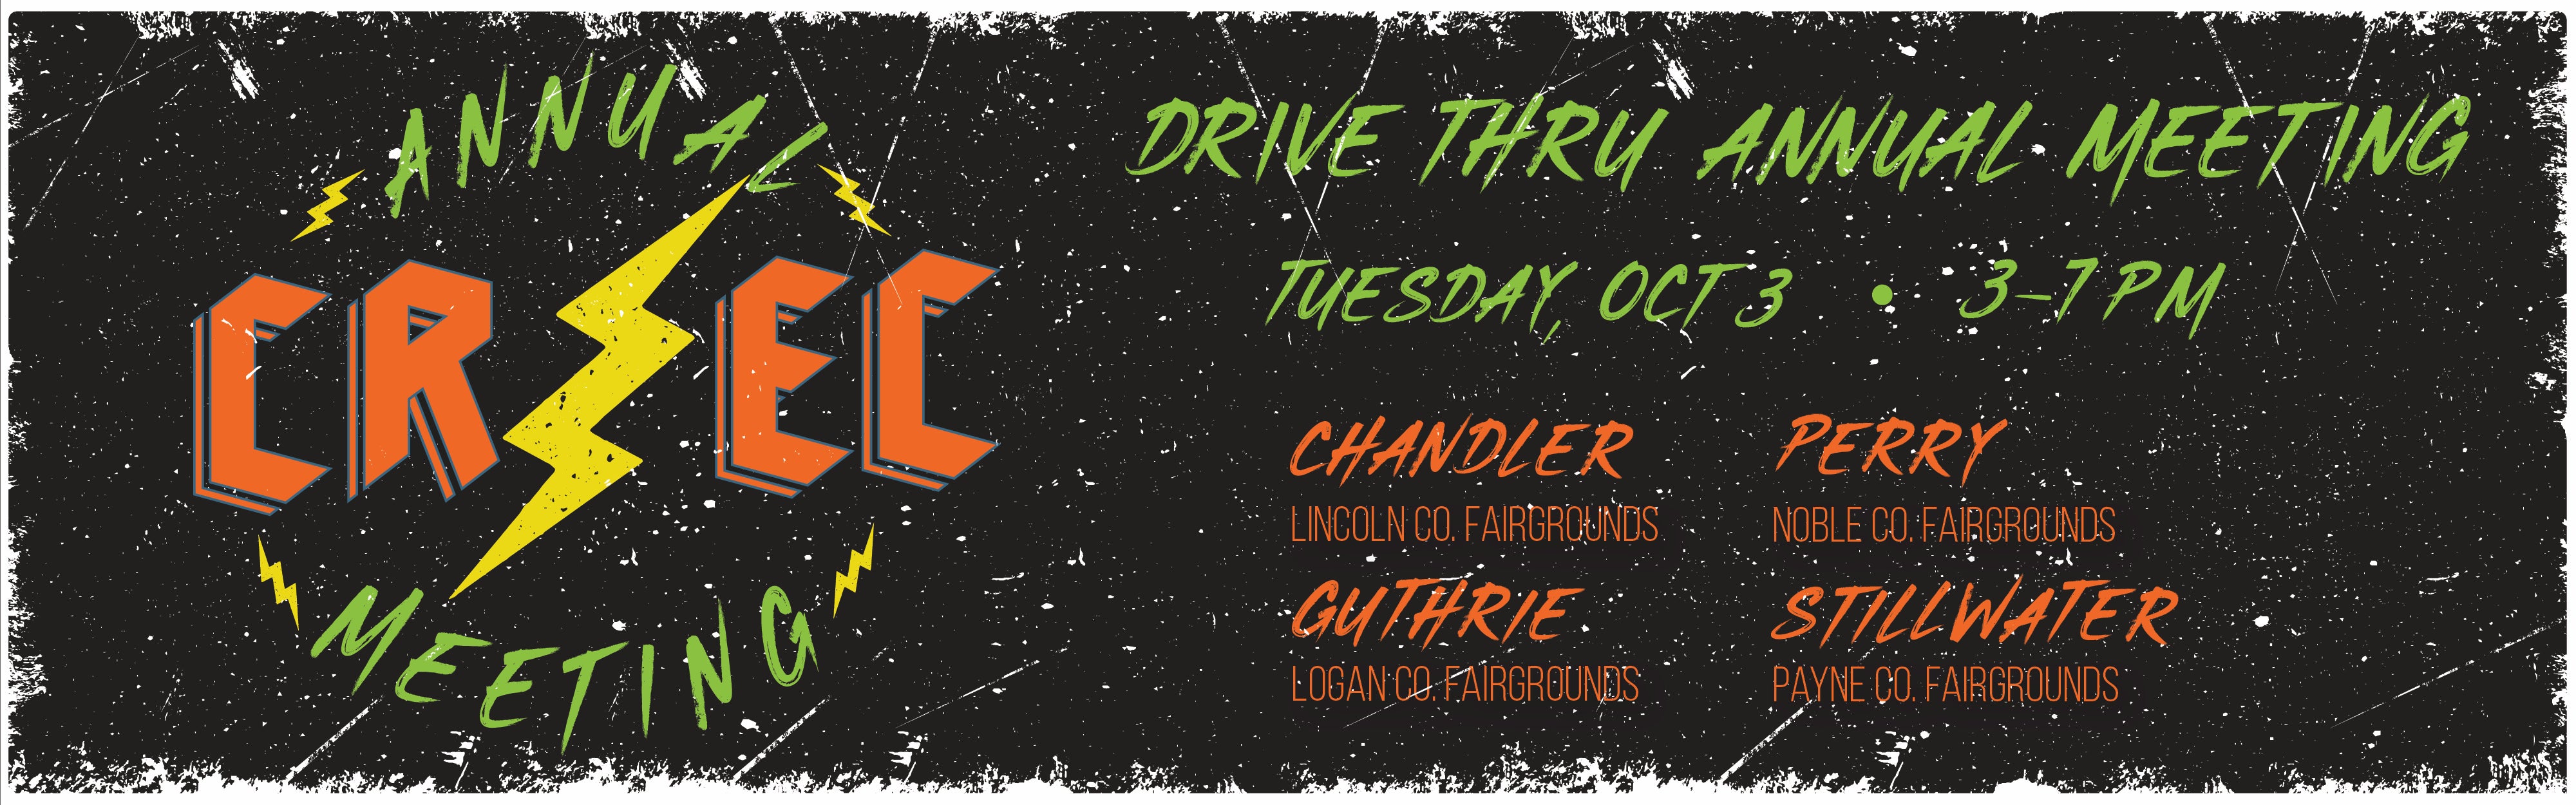 Drive Thru Annual Meeting Tuesday Oct. 3 from 3 to 7 p.m. in Chandler, Guthrie, Perry and Stillwater. 